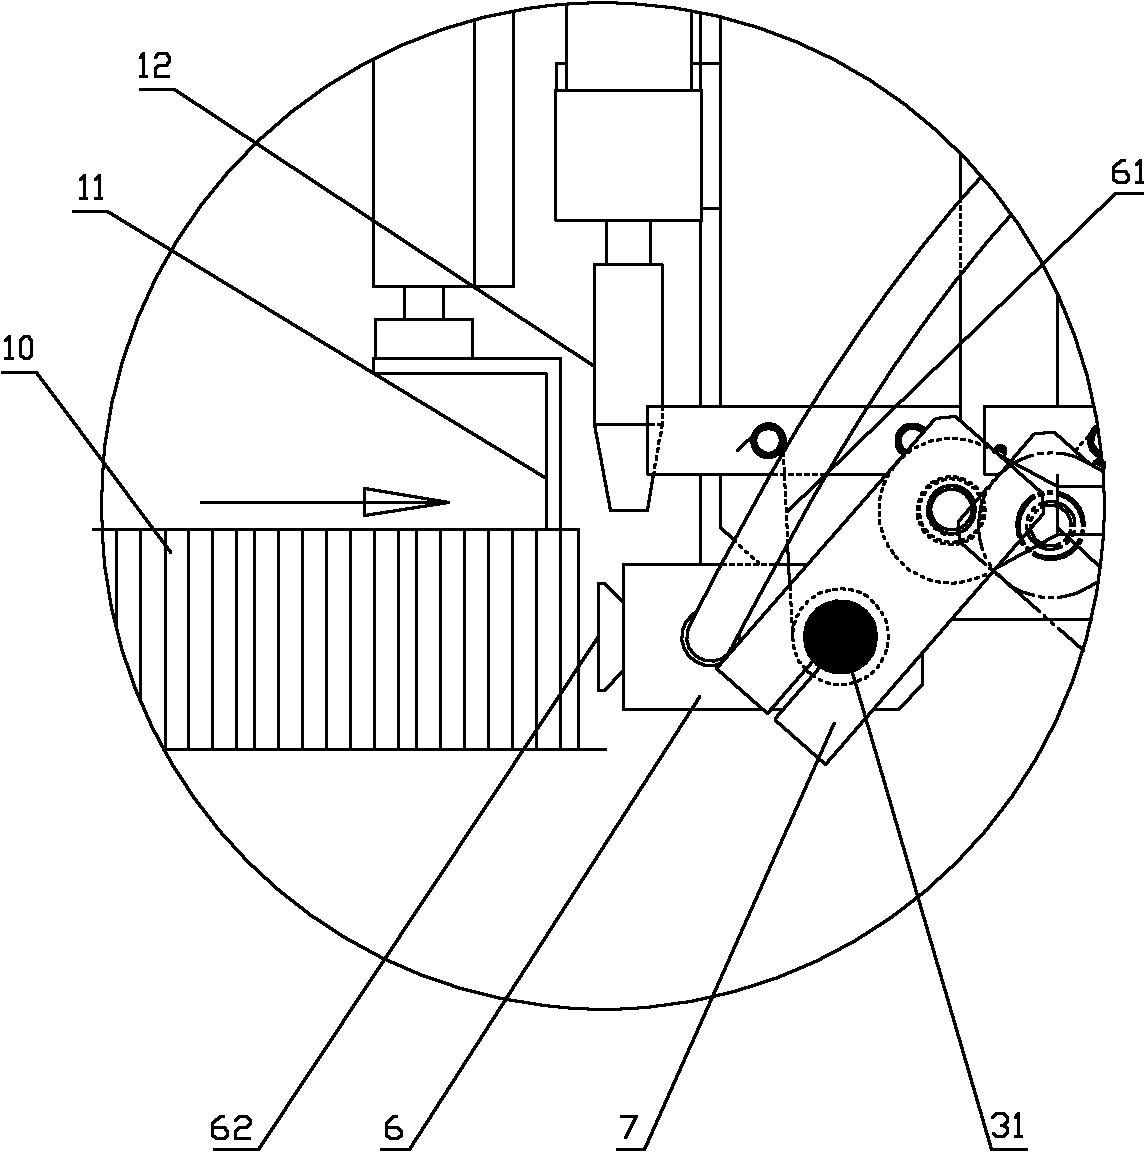 Flake absorbing mechanism for automatic flaker